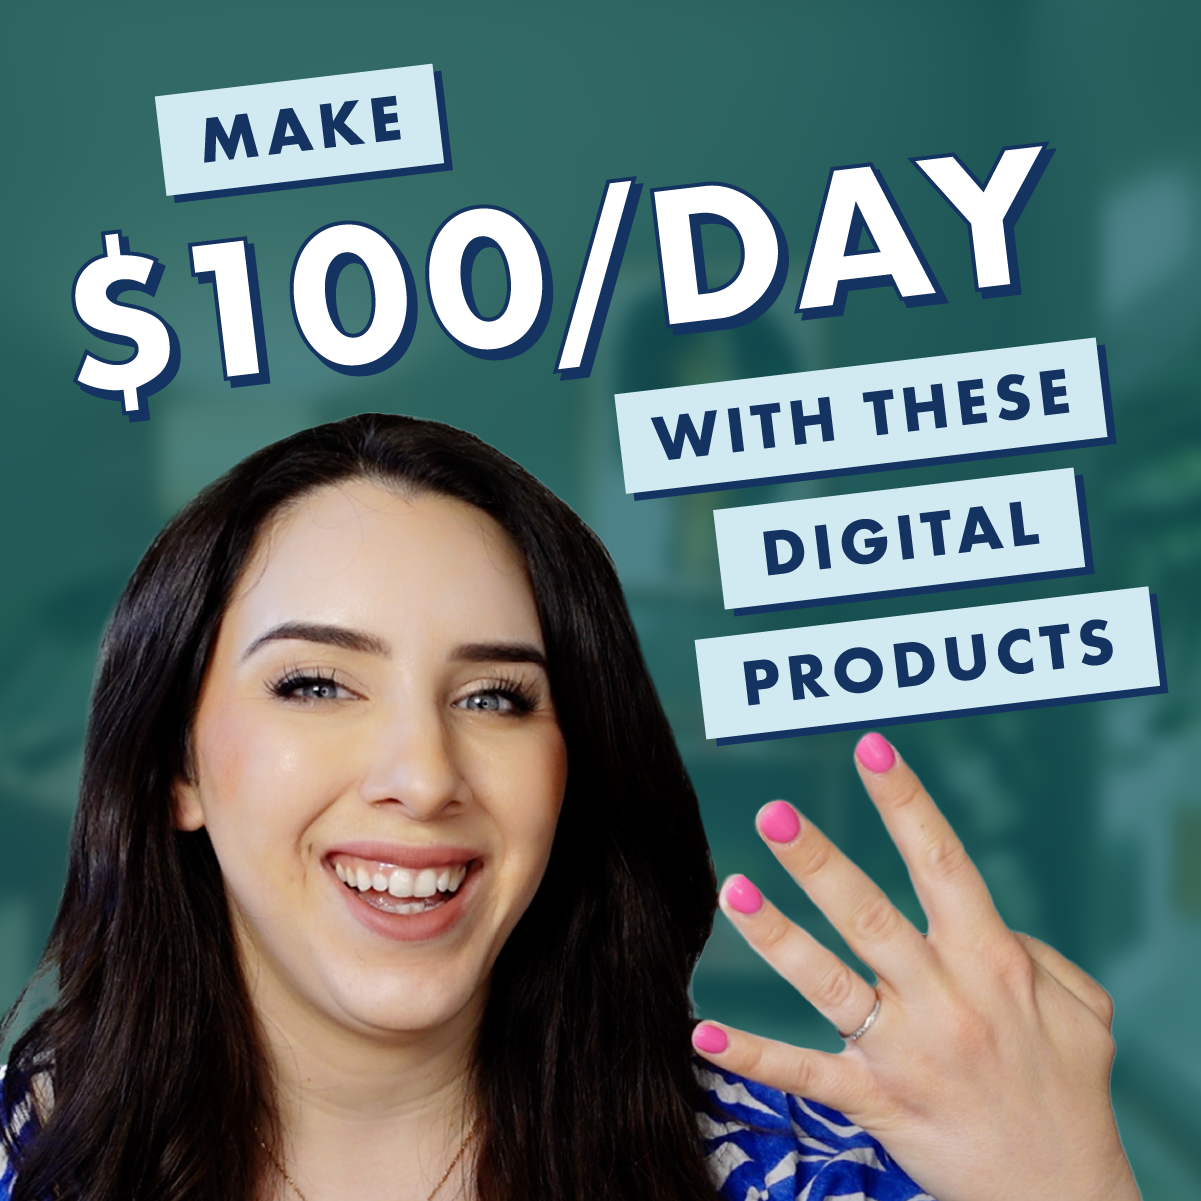 Christina-Scalera-Digital-Products-That-Make-AT-LEAST-100-a-Day-1